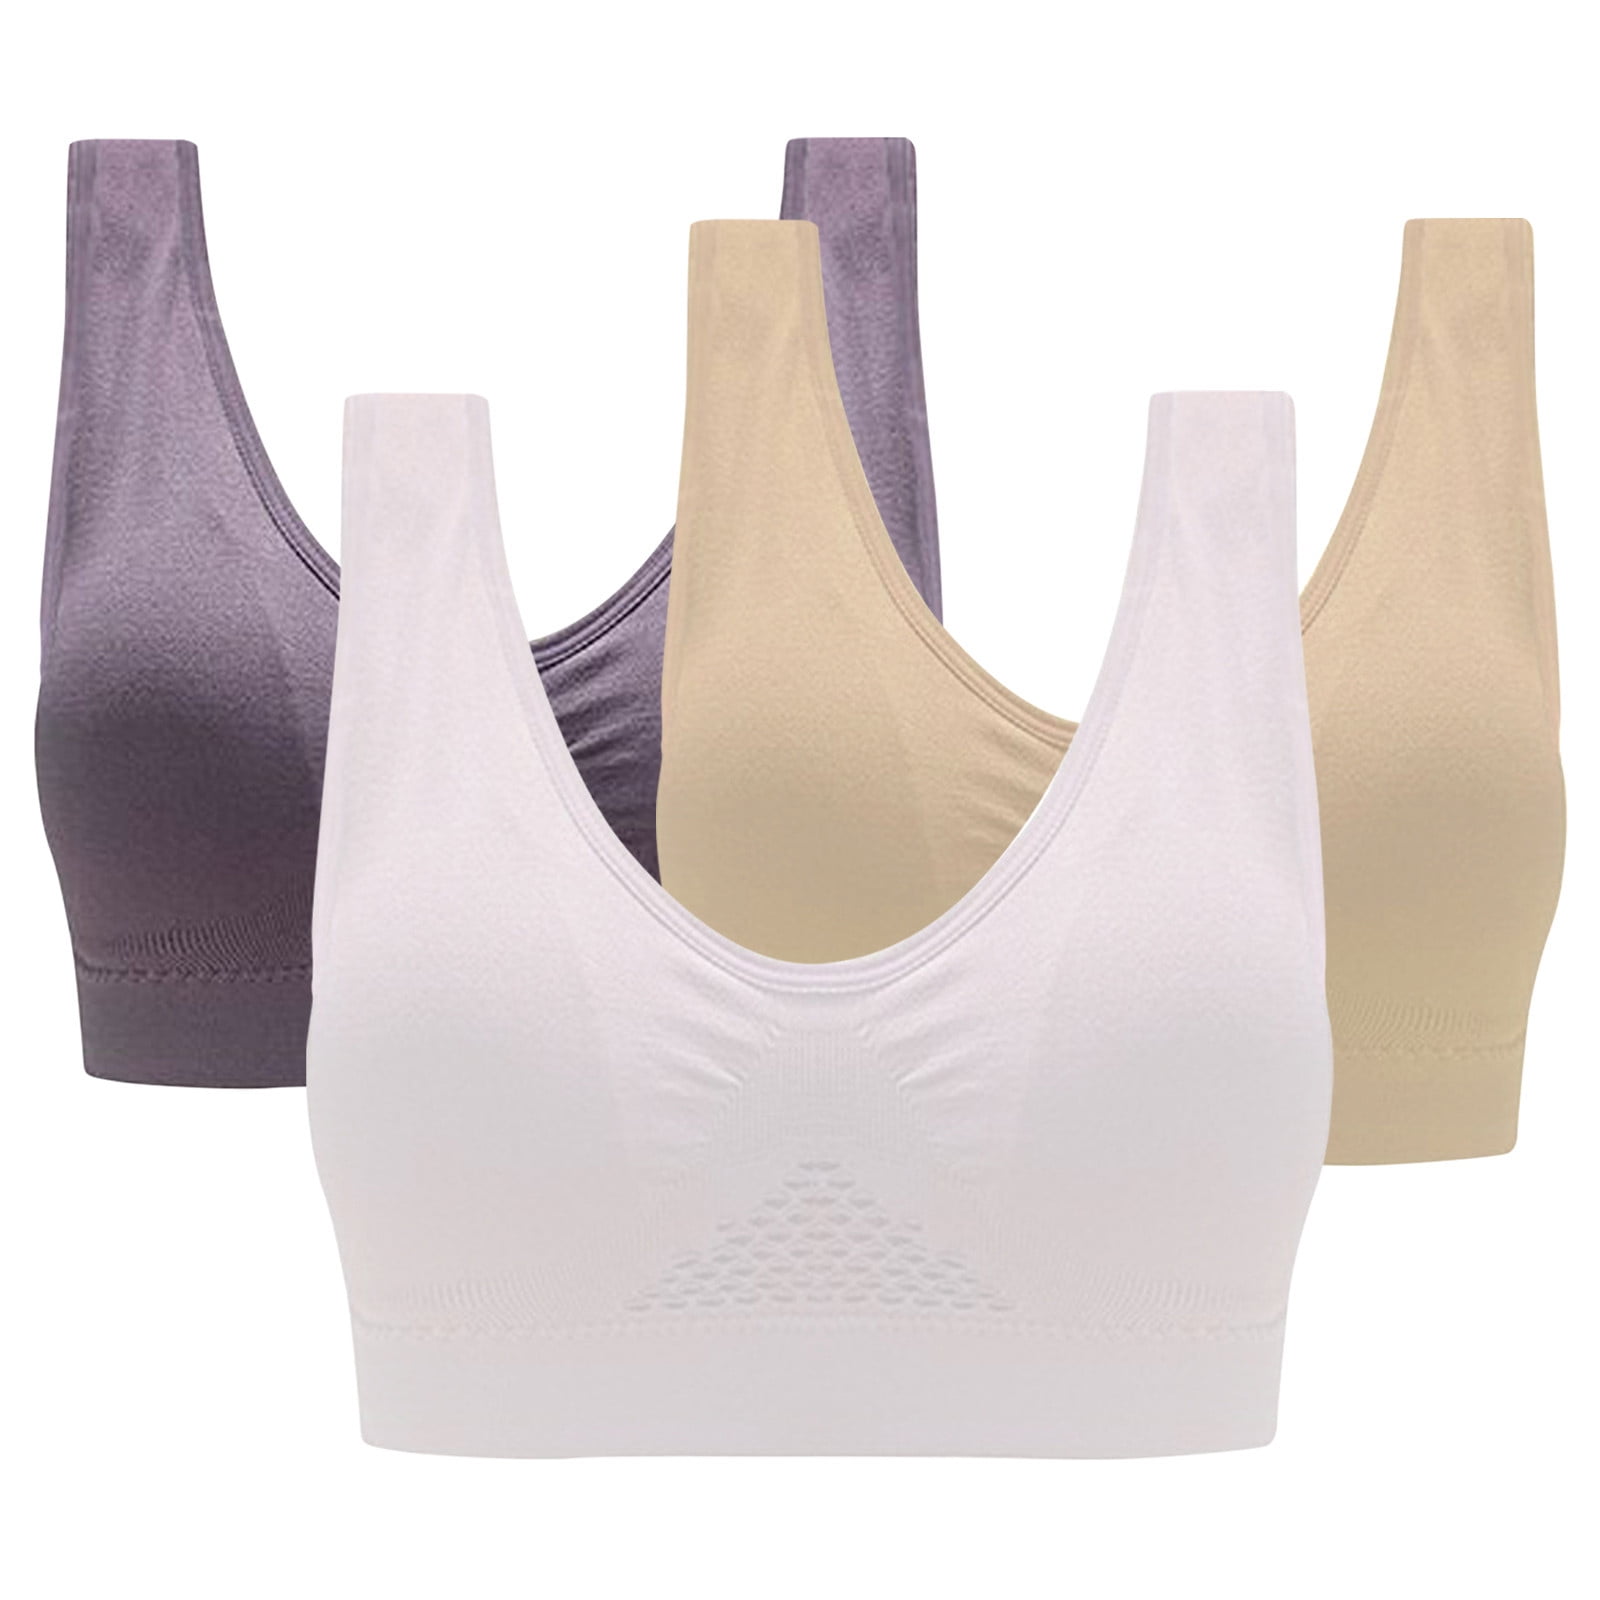 FAFWYP Womens Sexy Front Closure High Impact Sports Bras for Large Bust  Plus Size Push Up Wireless T-Shirt Paded Yoga Fitness Bras High Support No  Underwire Comfort Breathable Bralettes 